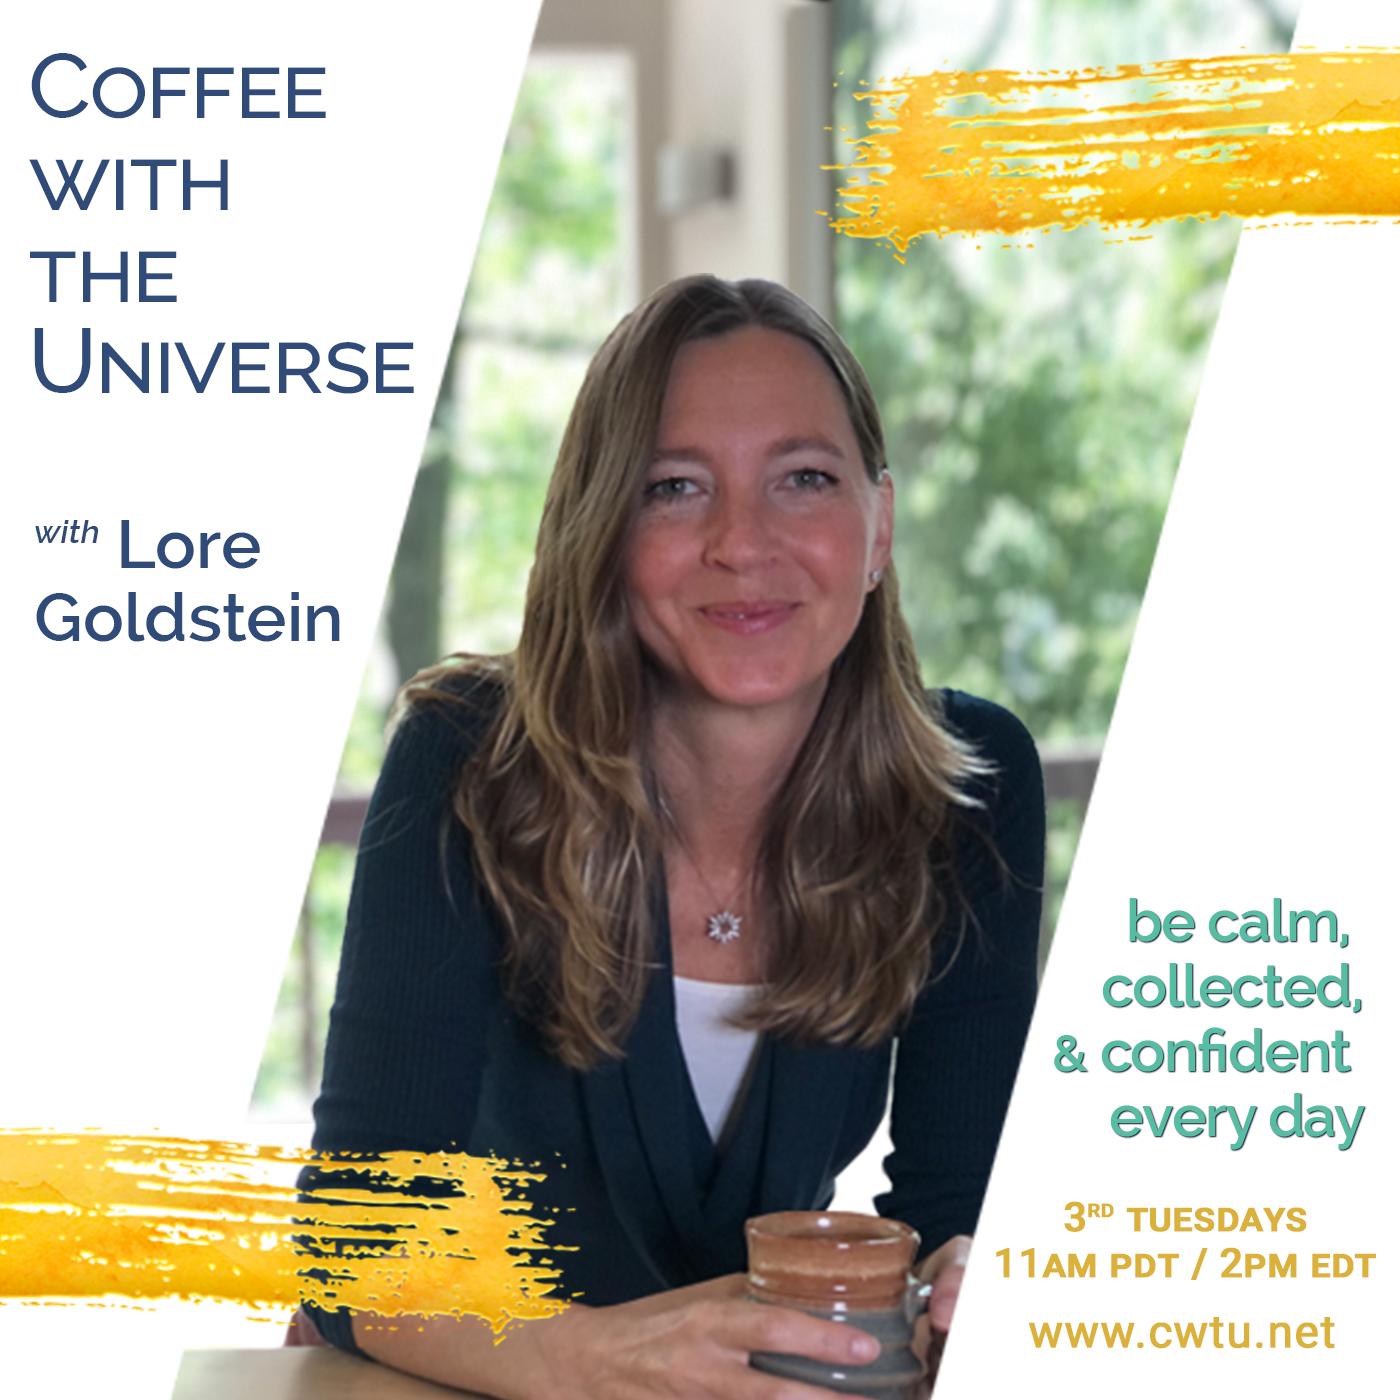 Coffee with the Universe: Be Calm, Collected, and Confident Every Day with Lore Goldstein